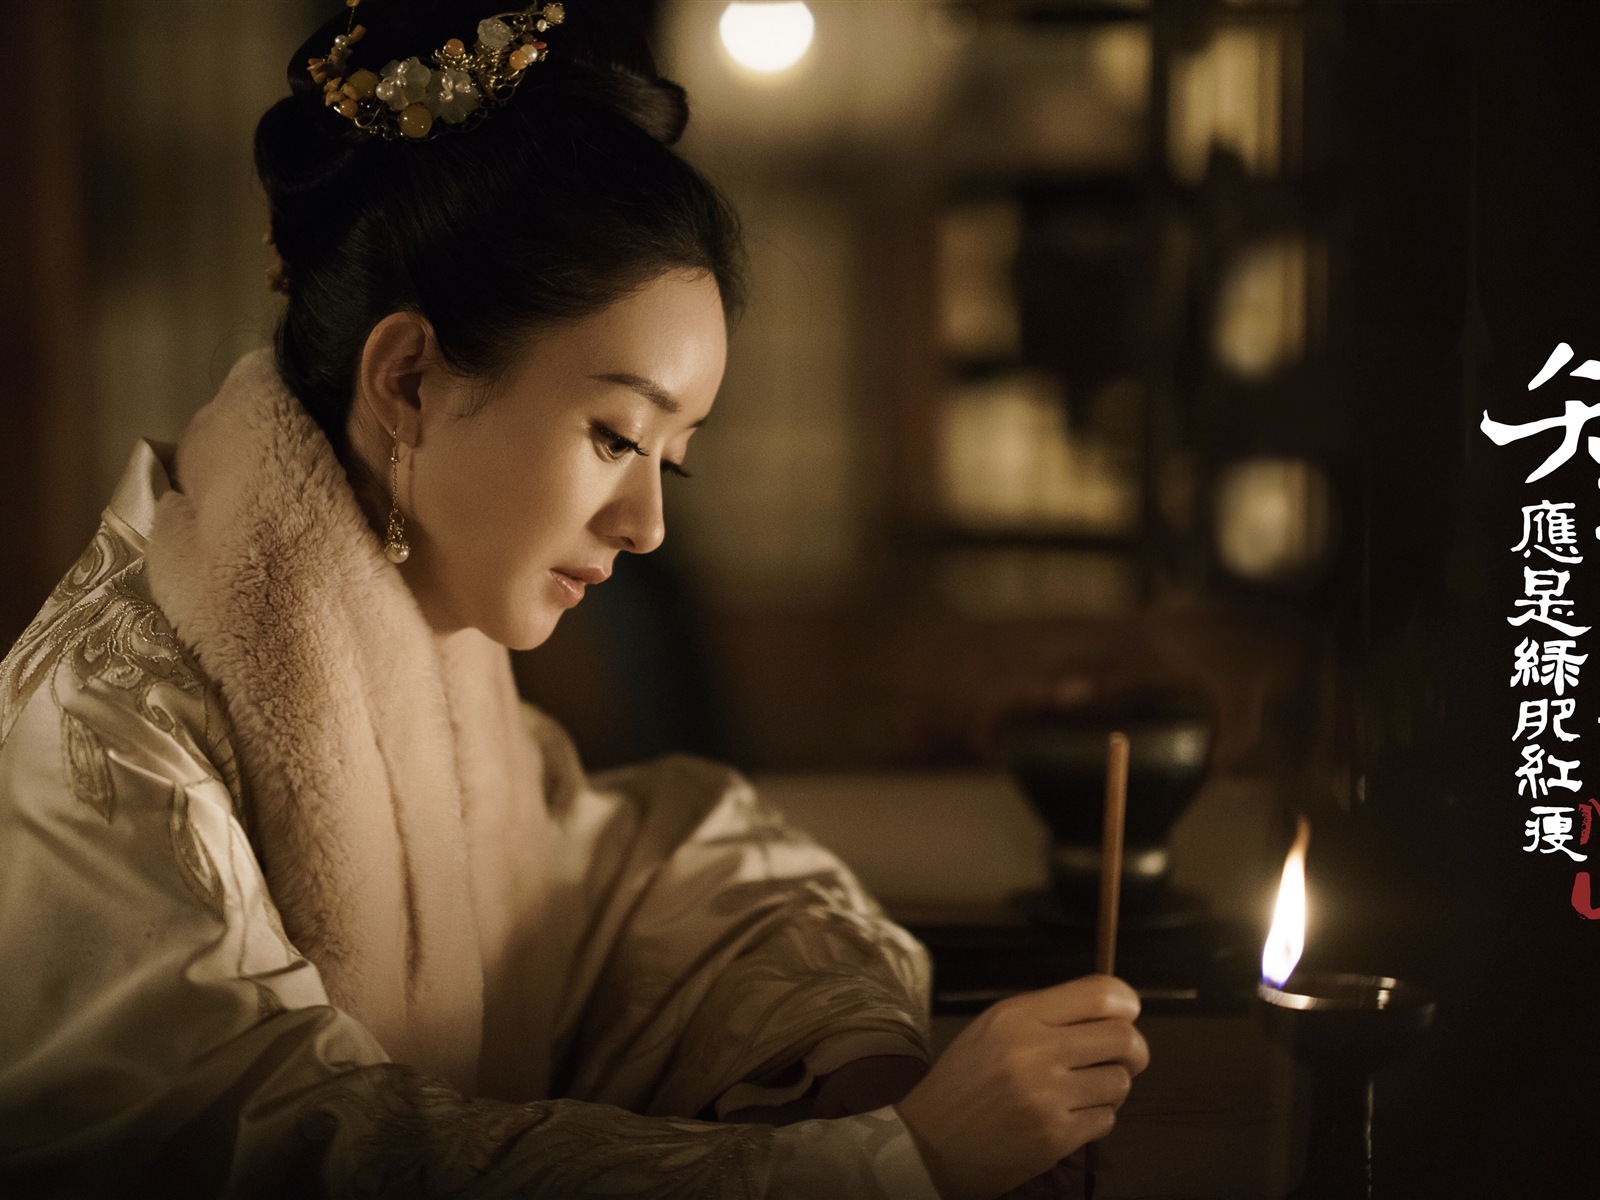 The Story Of MingLan, TV series HD wallpapers #26 - 1600x1200